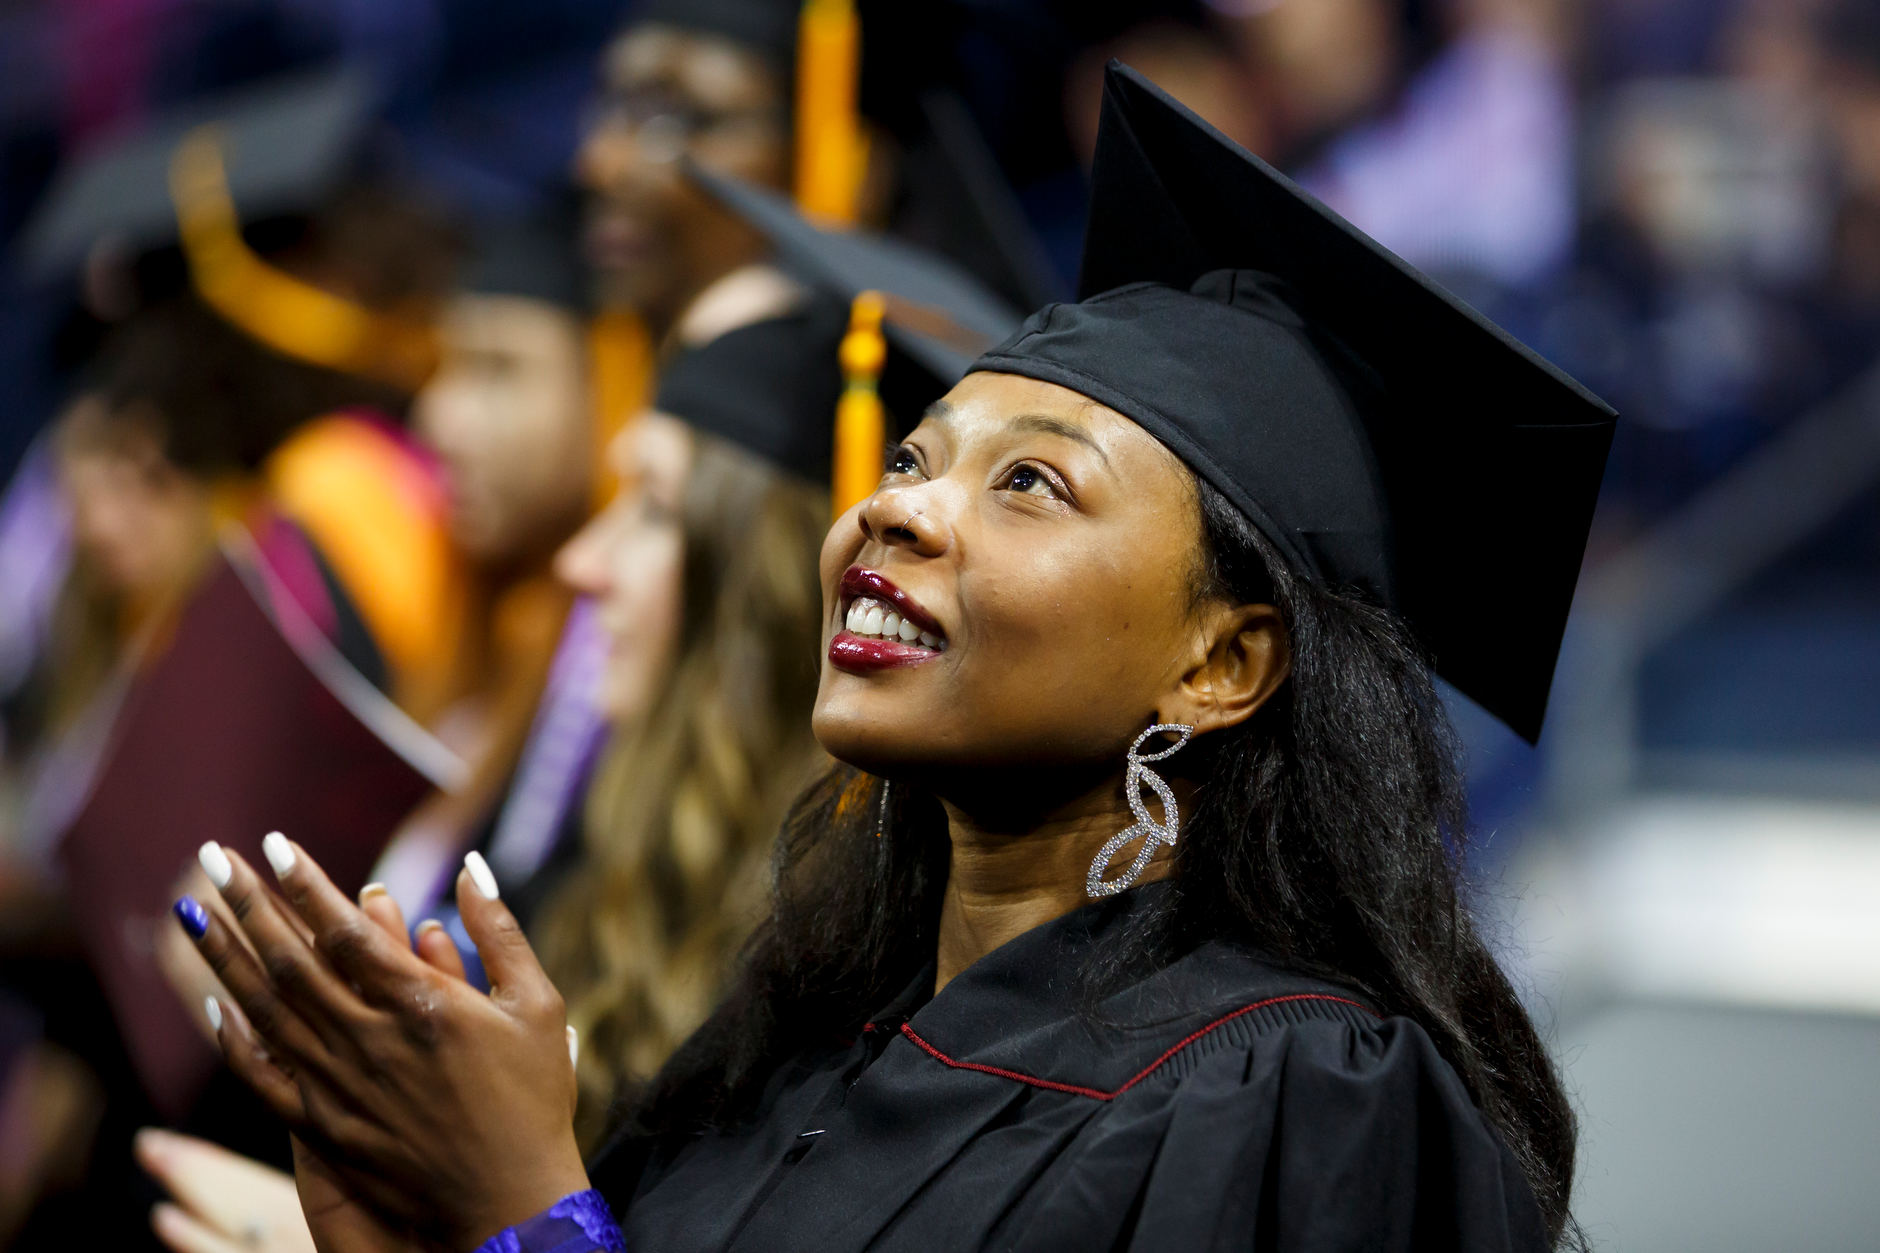 A graduate watches the ceremony on a video board during the IU South Bend Commencement at the University of Notre Dame on Tuesday, May 7, 2019. (James Brosher/Indiana University)